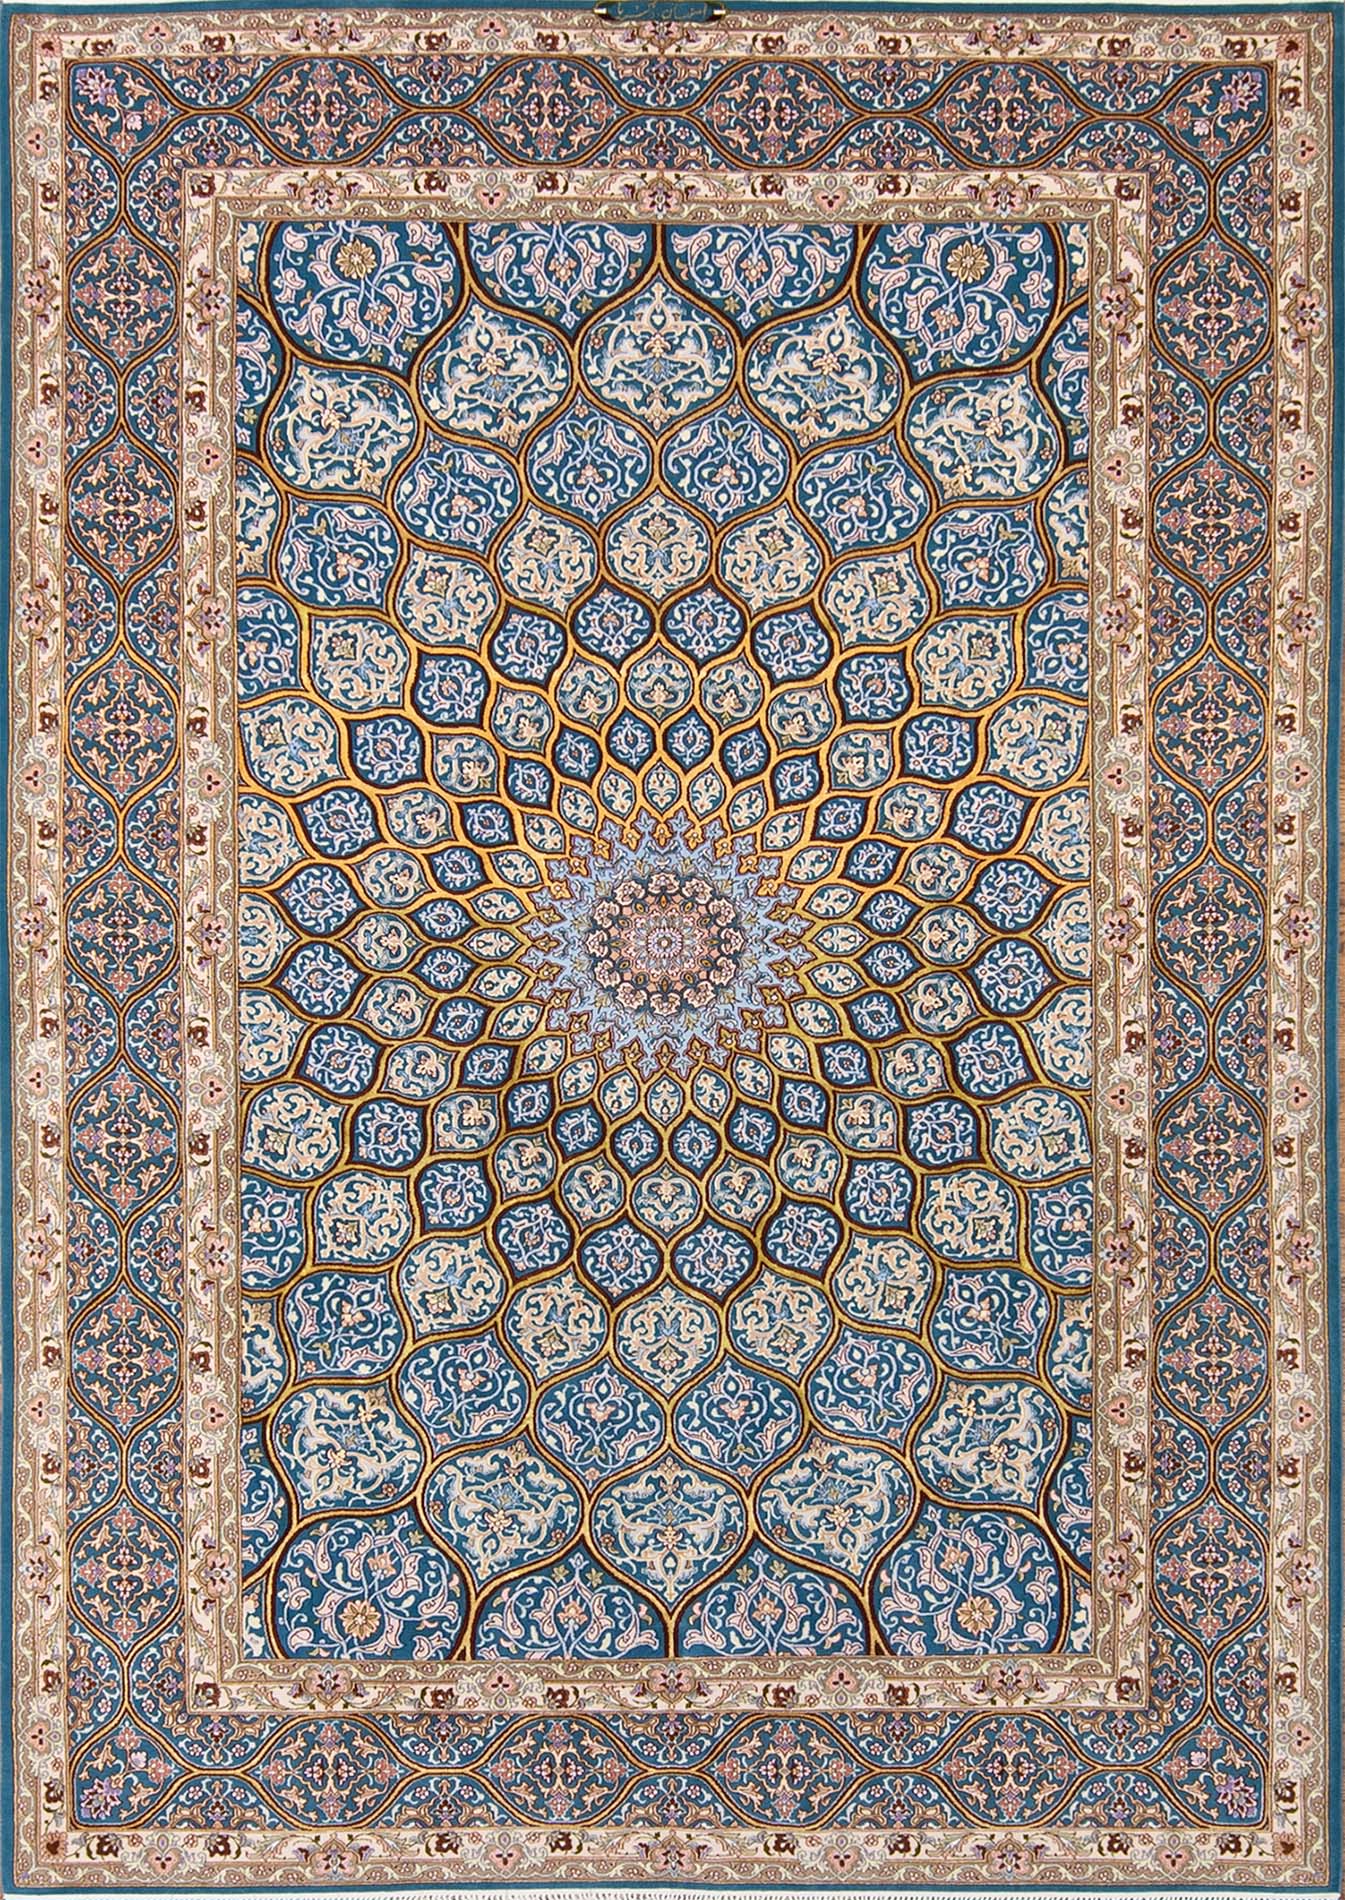 7x10 blue and gold Persian rug. Handmade Persian Isfahan rug with dome design.